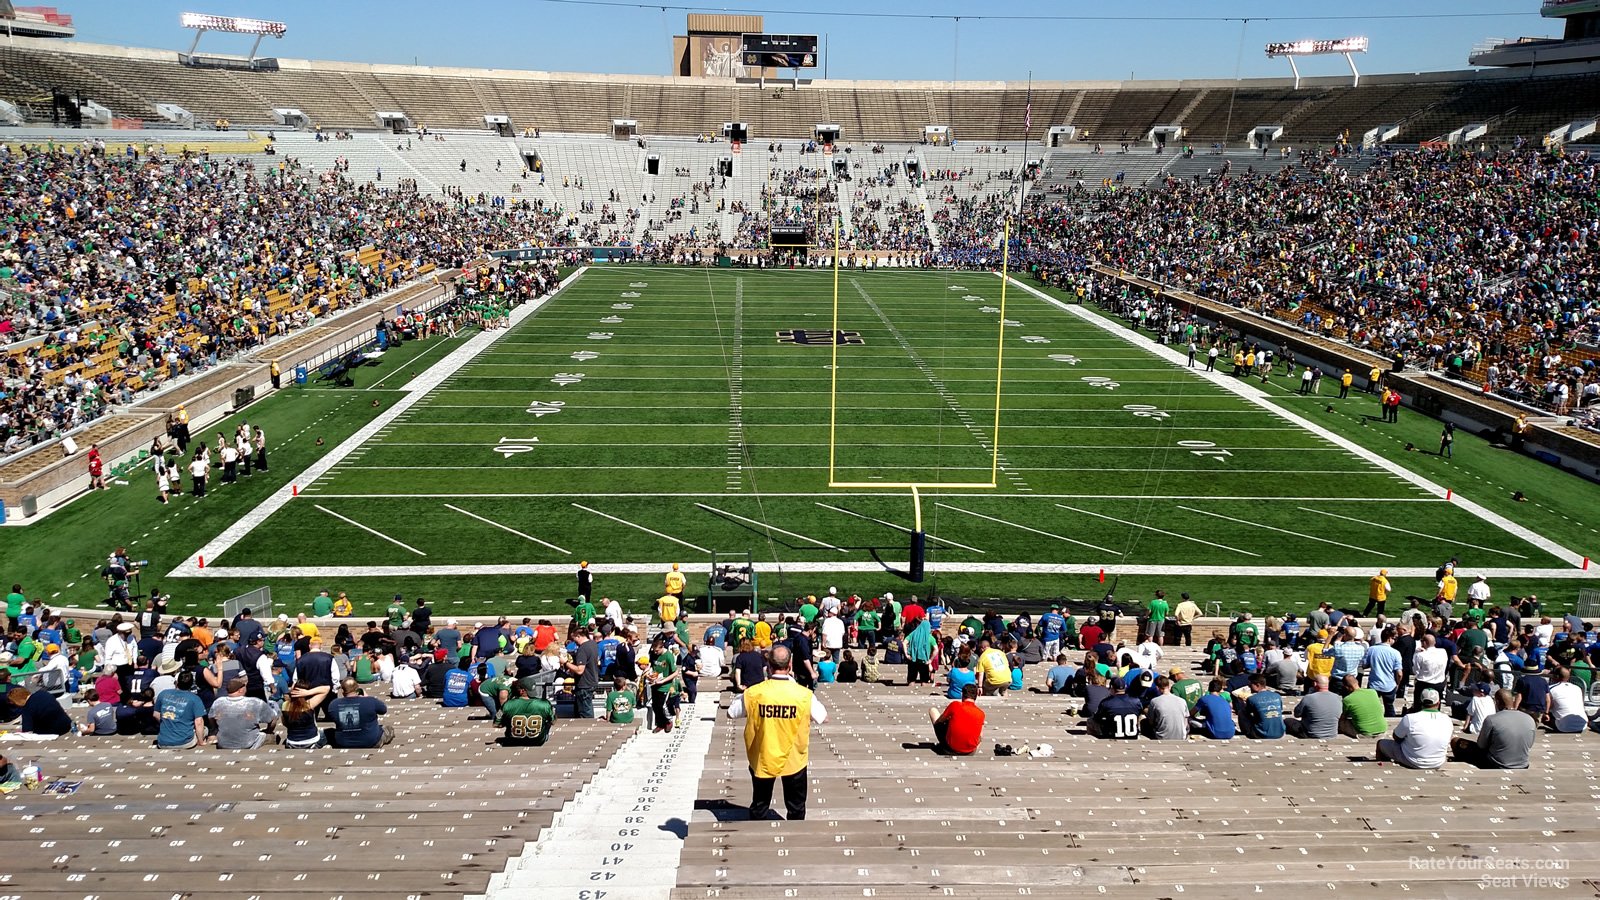 Notre Dame Football Seating Chart Rows